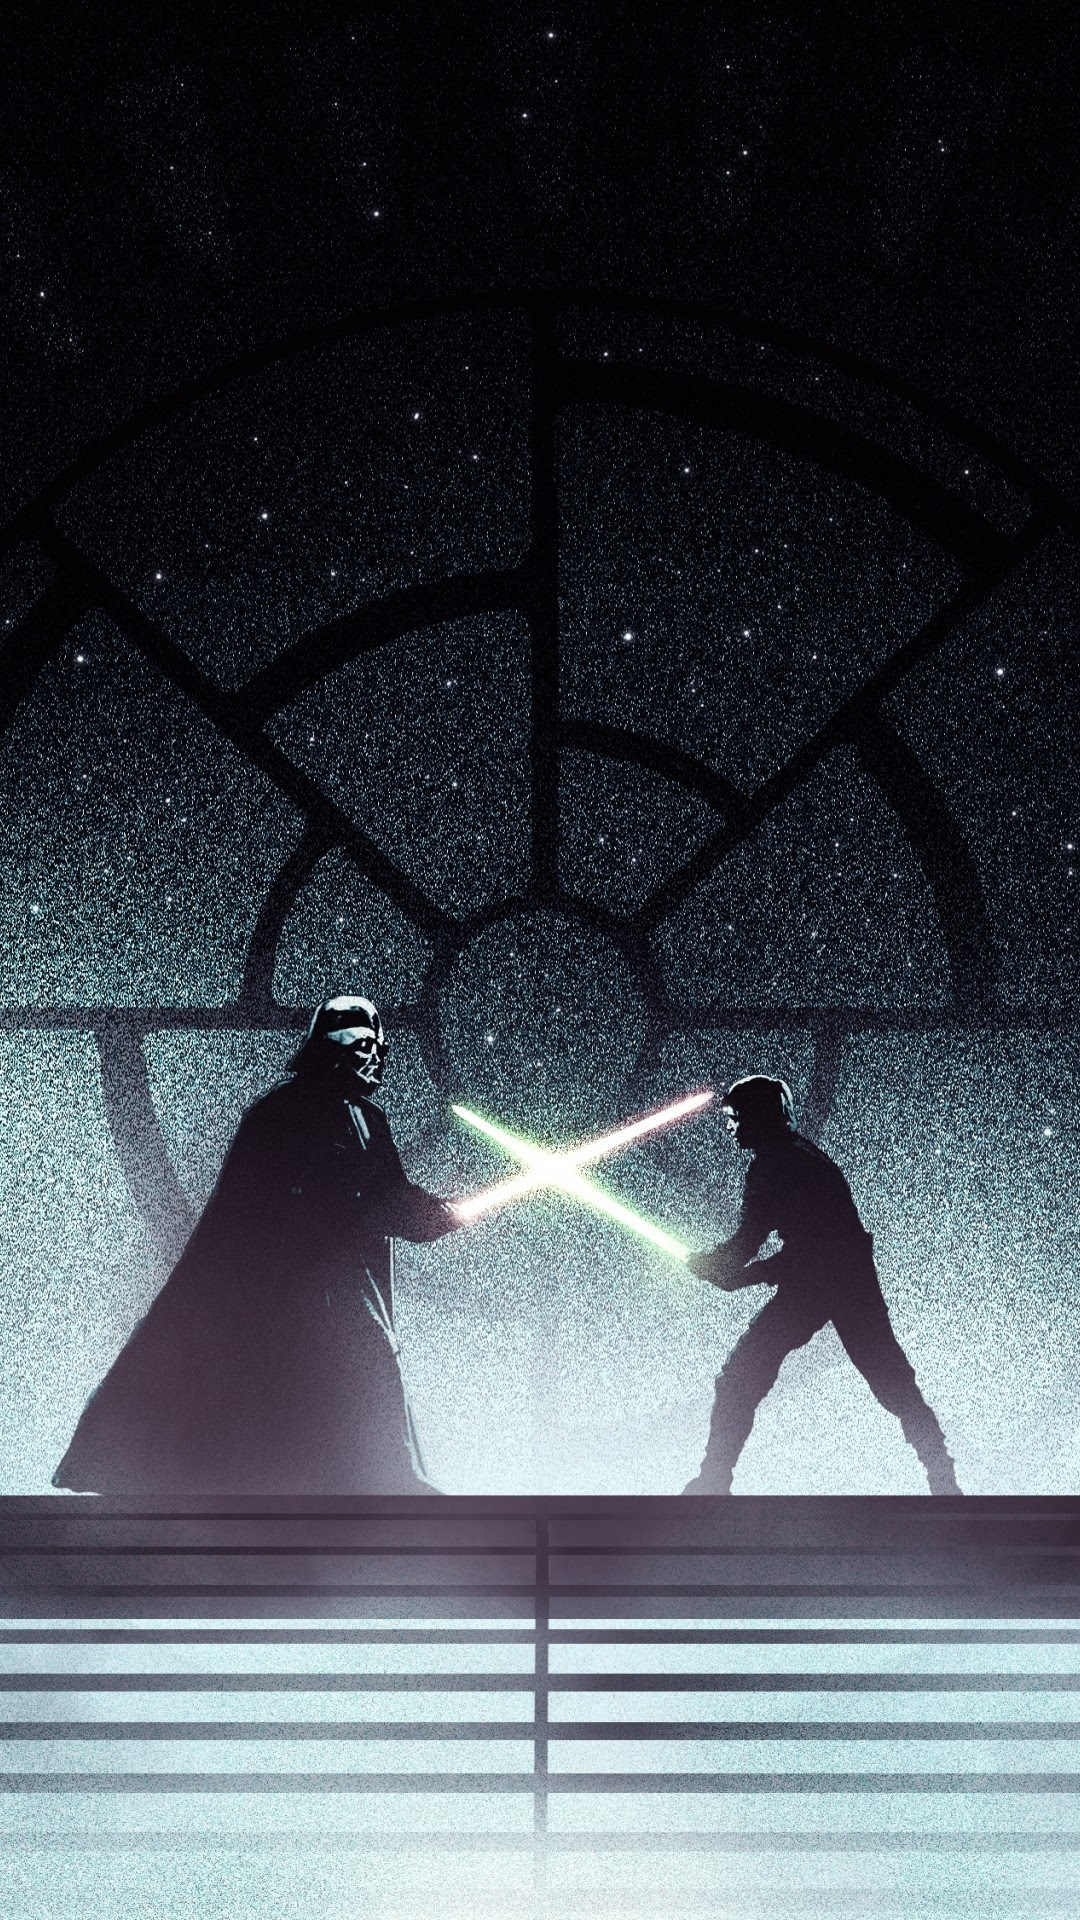 Star Wars Iphone 6 Wallpaper 89 Images